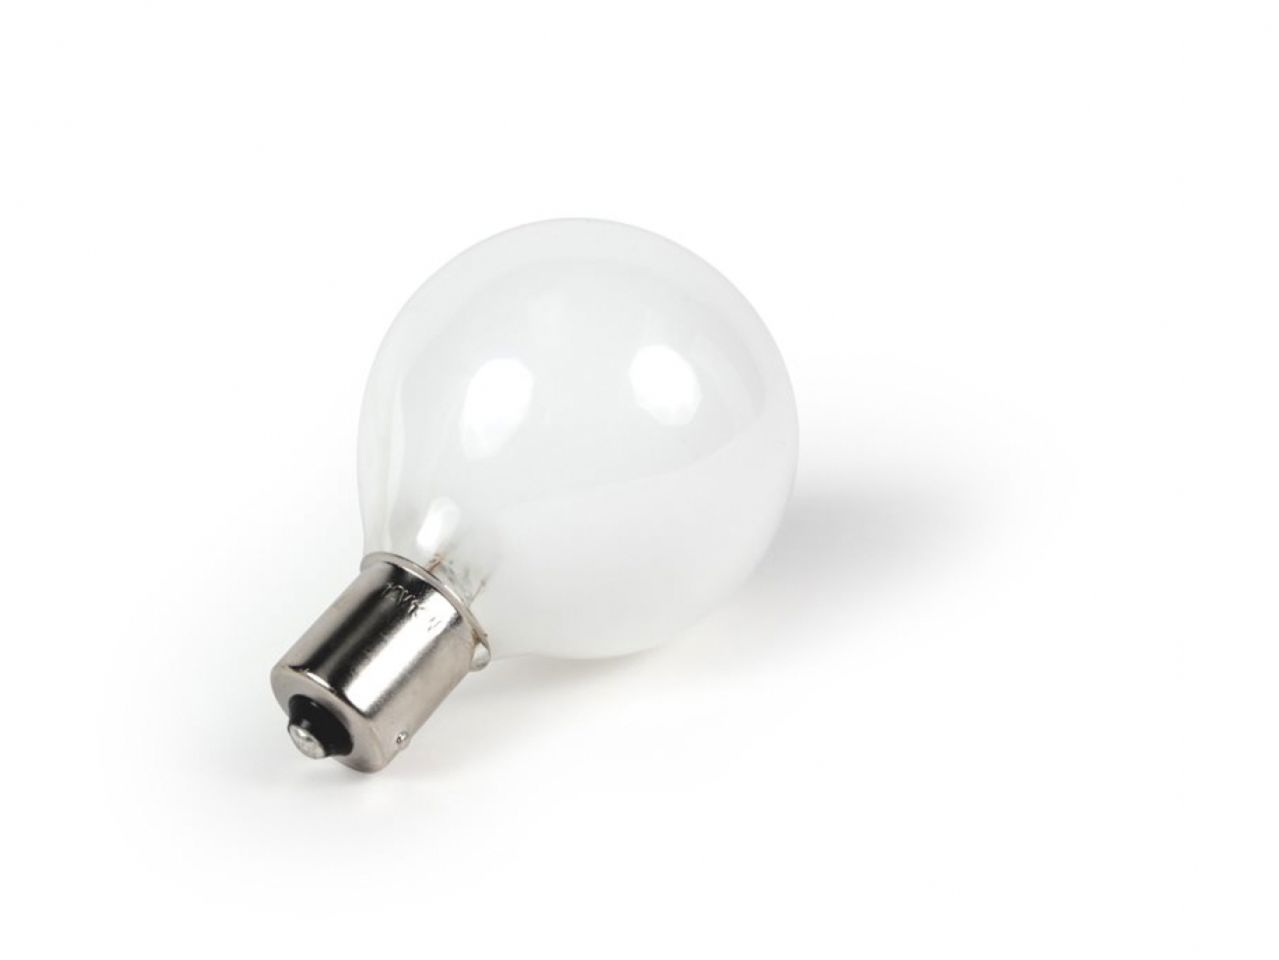 Camco 20-99 Frosted Replacement Vanity Light Bulb